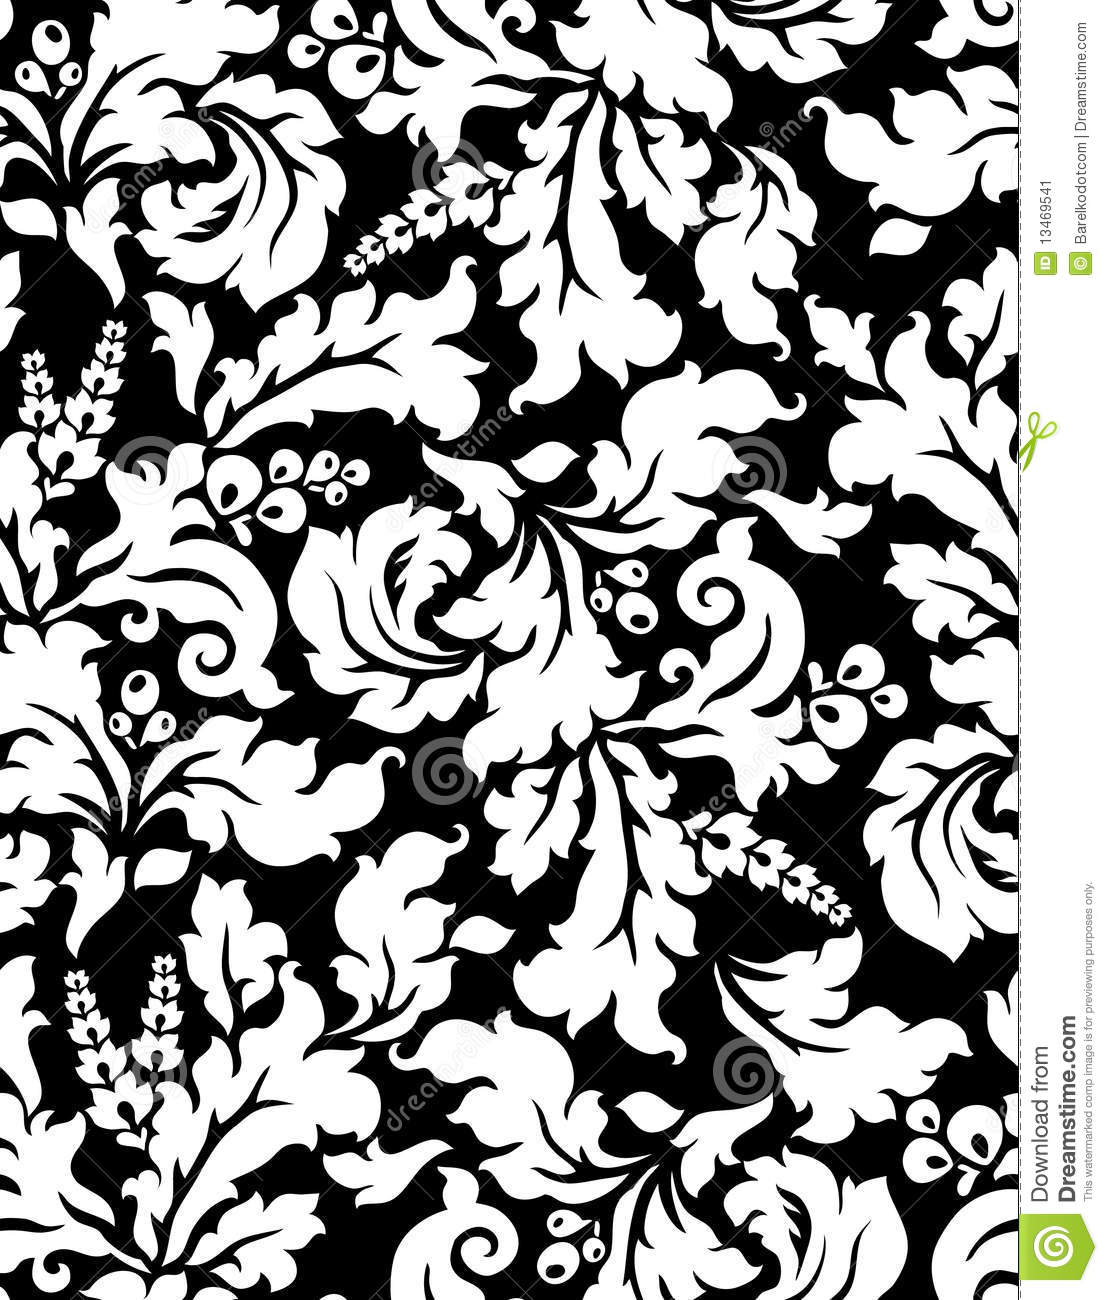 Black and White Damask Pattern Vector